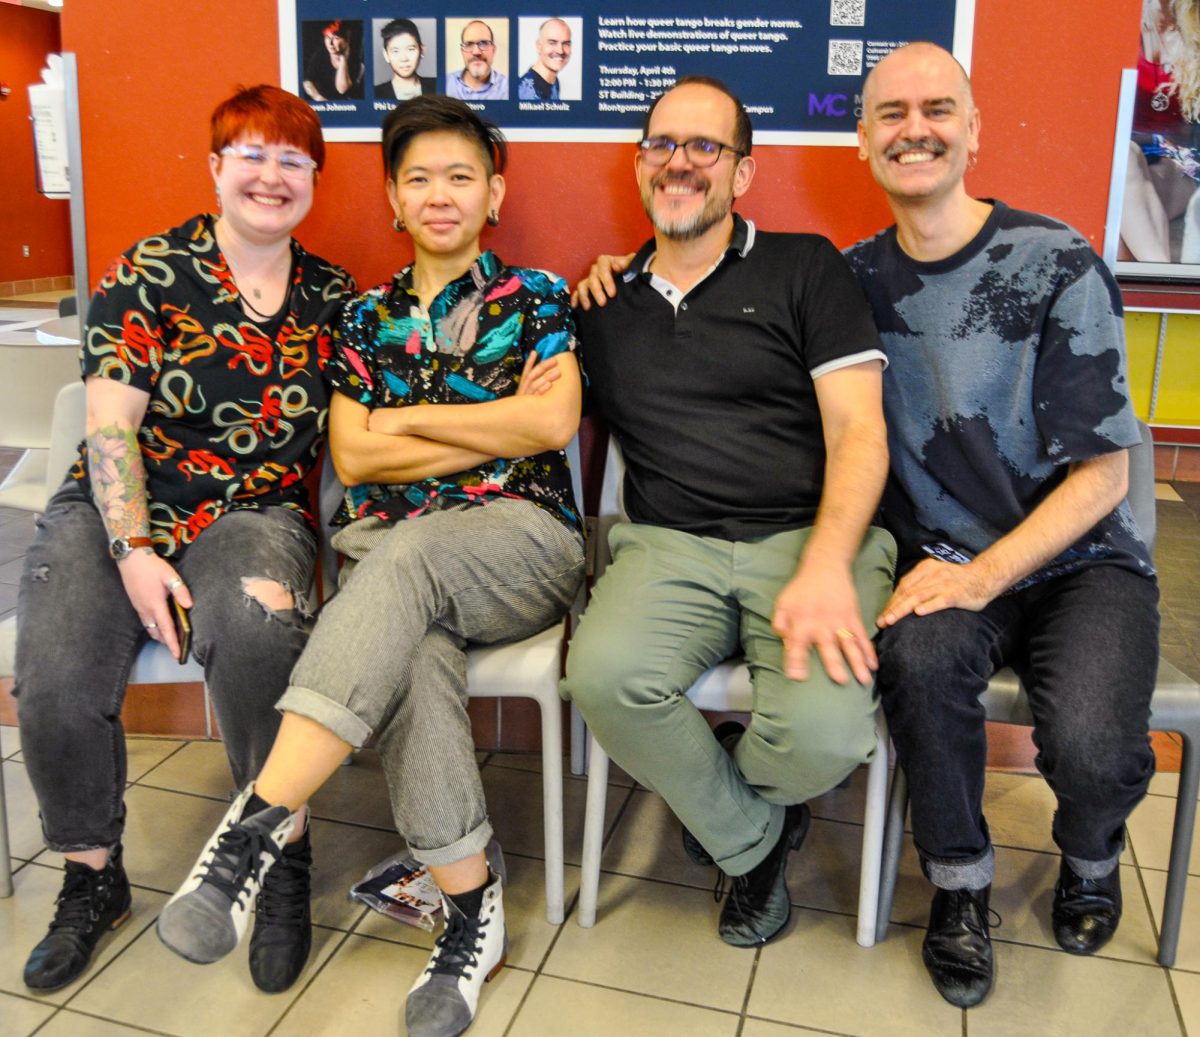 All four presenters Karen Johnson, Phi Lee Lam, Jose Otero, and Mikael Schulz (left to right) pose for a snapshot following the Queer Tango Workshop at MC on April 4